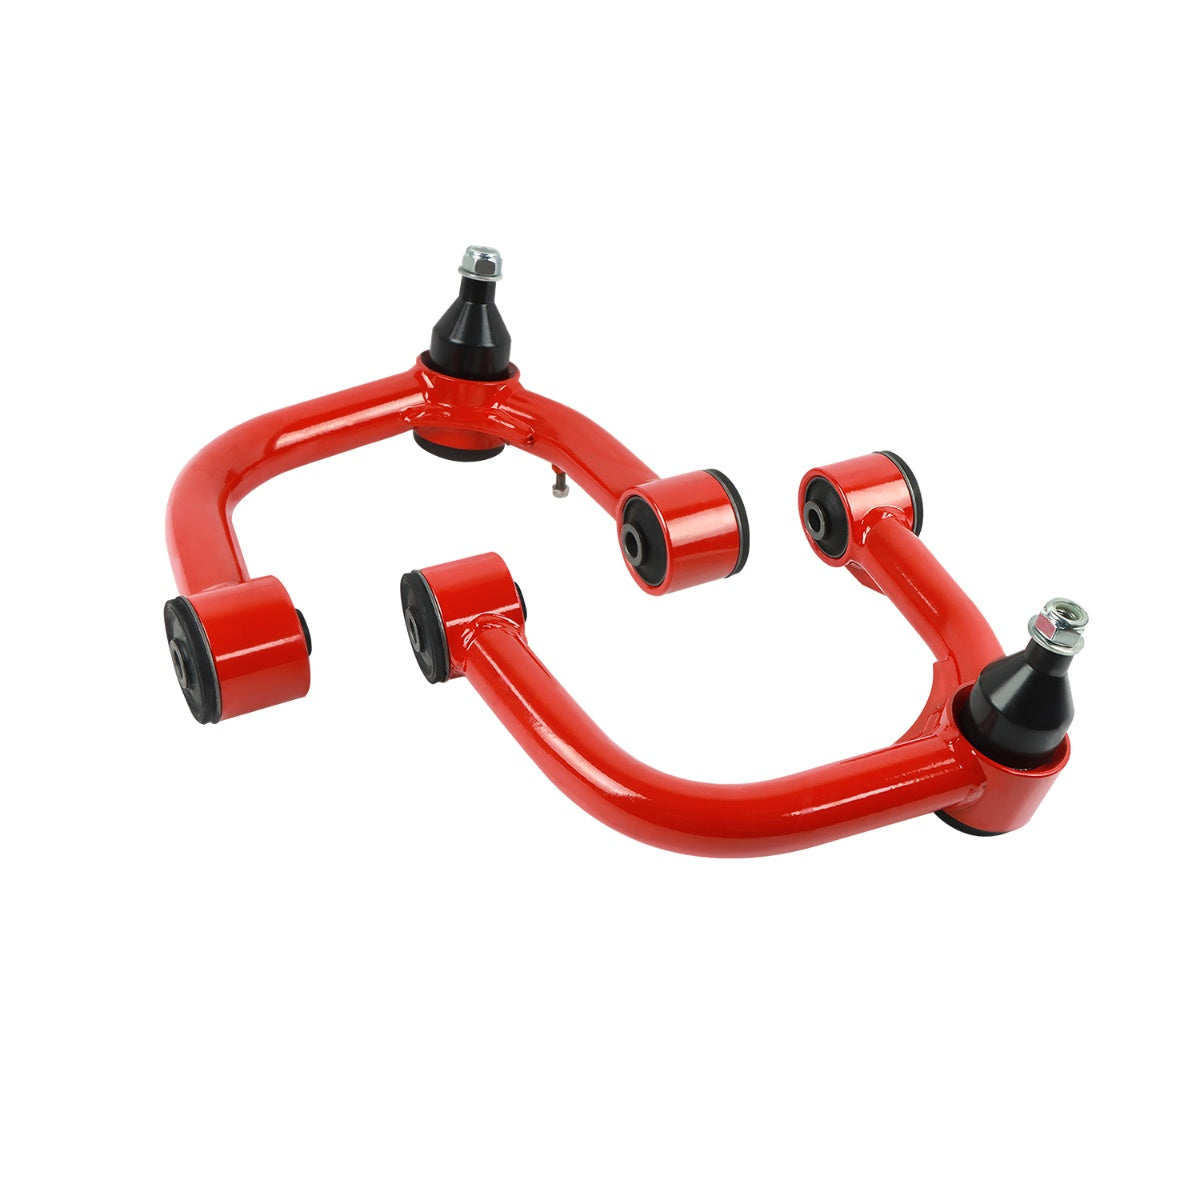 Upper Control Arm for 2005-2022 Toyota Tacoma, Daysyore Upper Control Arm, Auto Upper Control Arm, Car Upper Control Arm